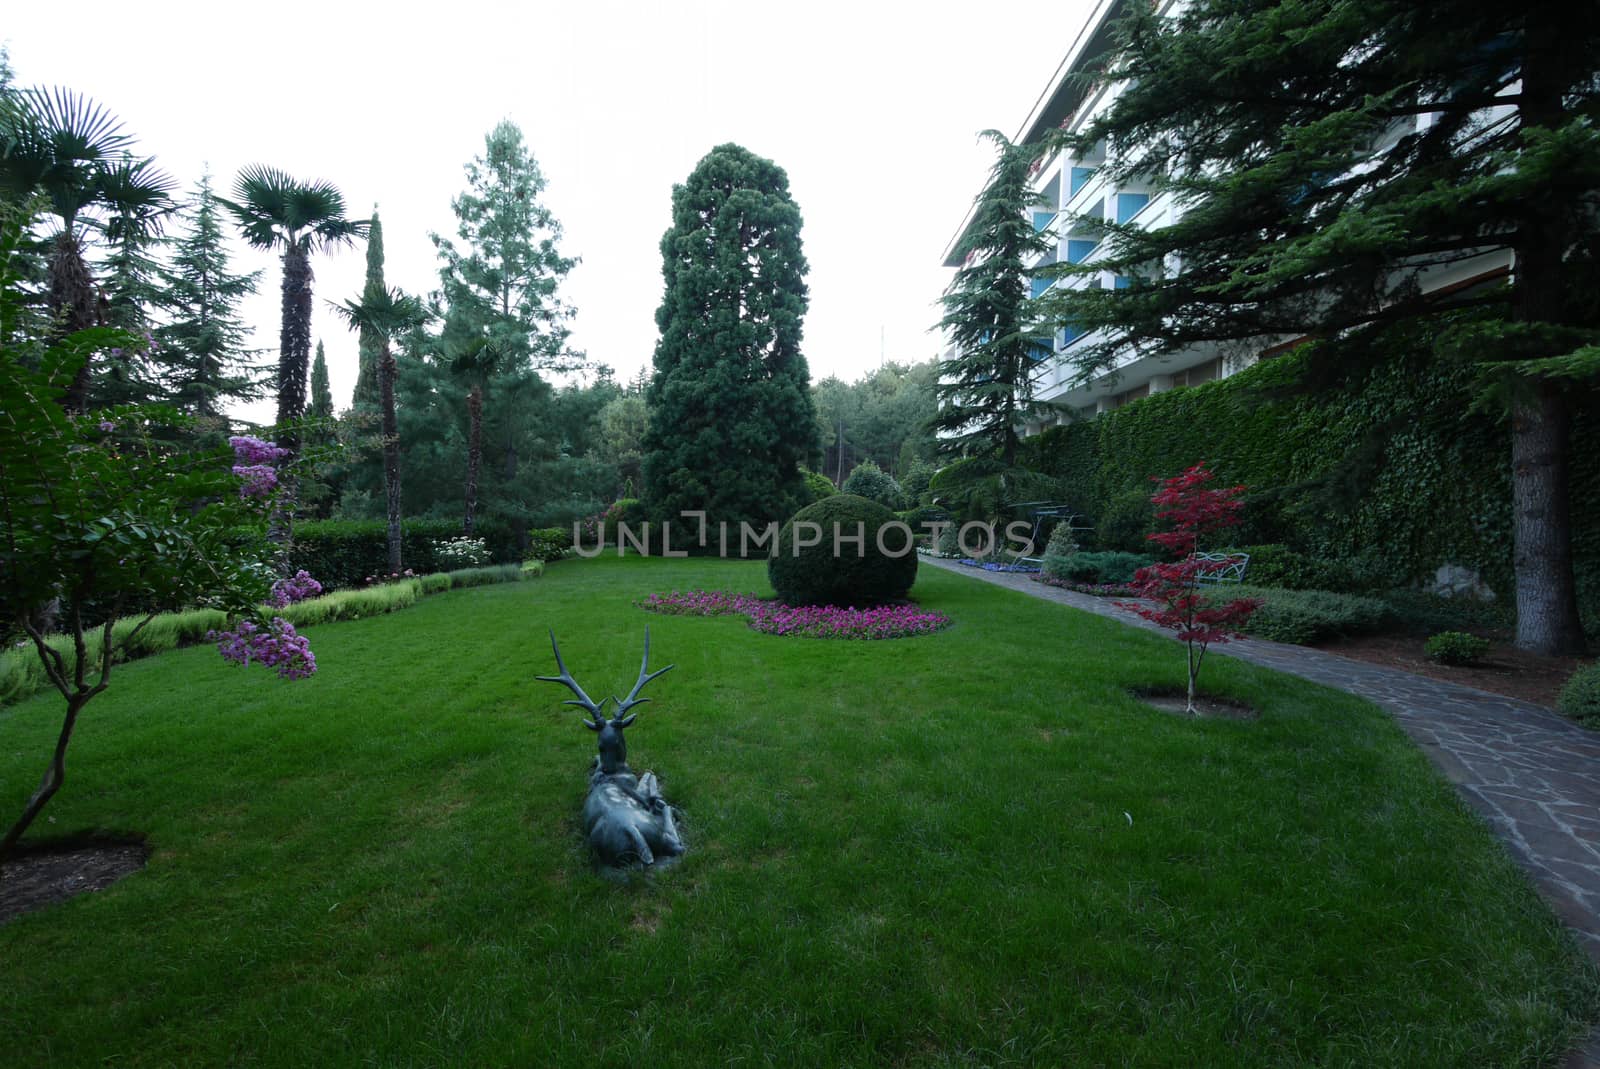 Statue of a deer on a lawn among a flower bed and trees